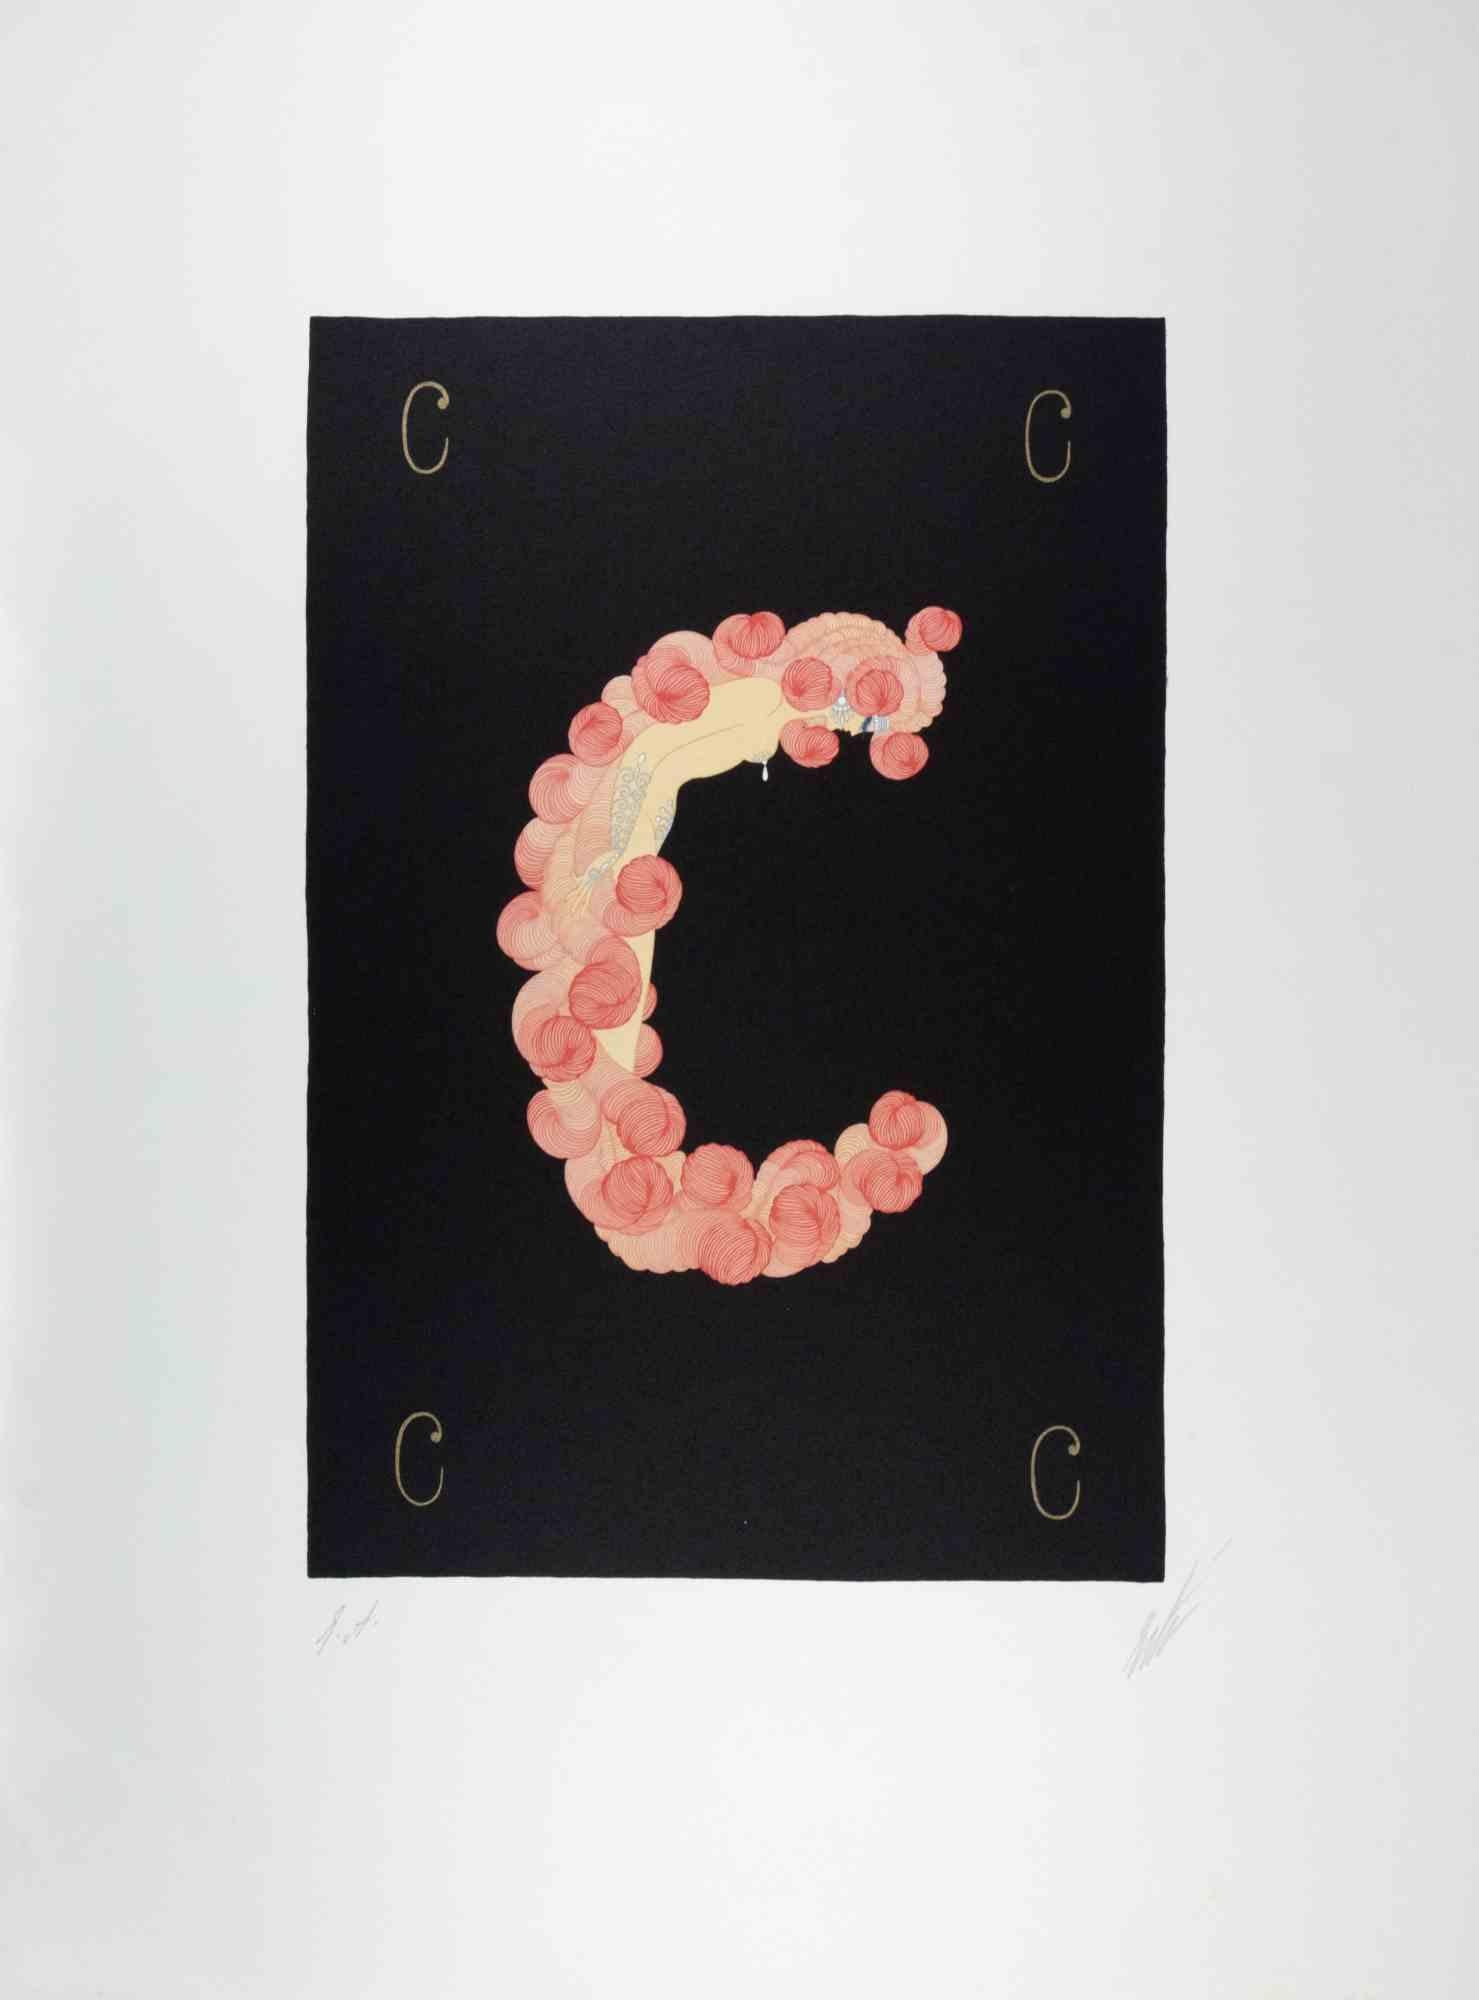 Letter C - from the suite Letters of the Alphabet is a contemporary artwork realized by Erté (Romain de Tirtoff.

Lithograph and Screen Print.

The artwork is from the suite "Letters of the Alphabet", 1976.

 

Hand signed on the lower margin.